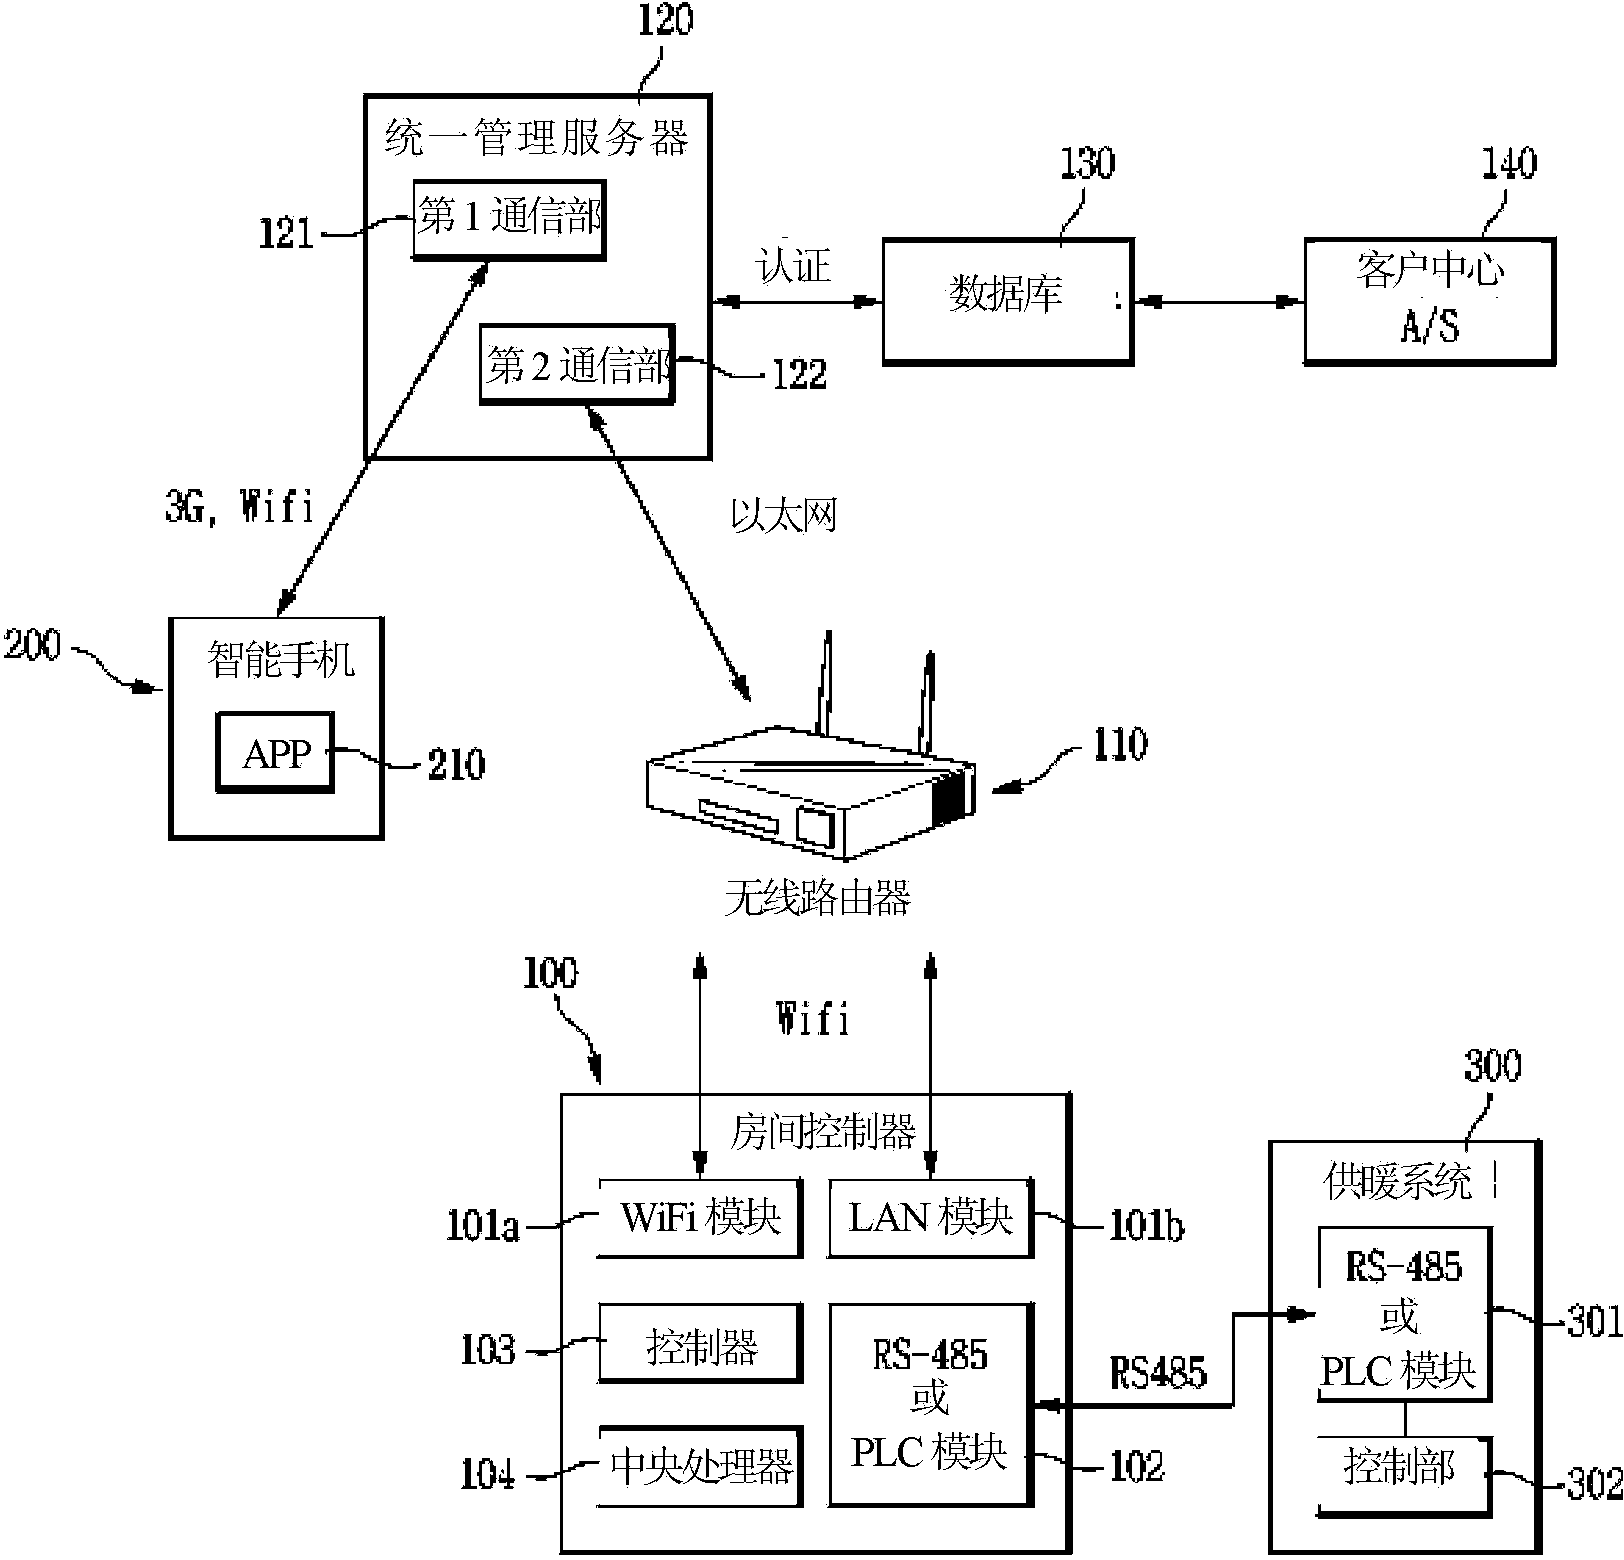 Heating system remote control and management device using a smart phone application and its method